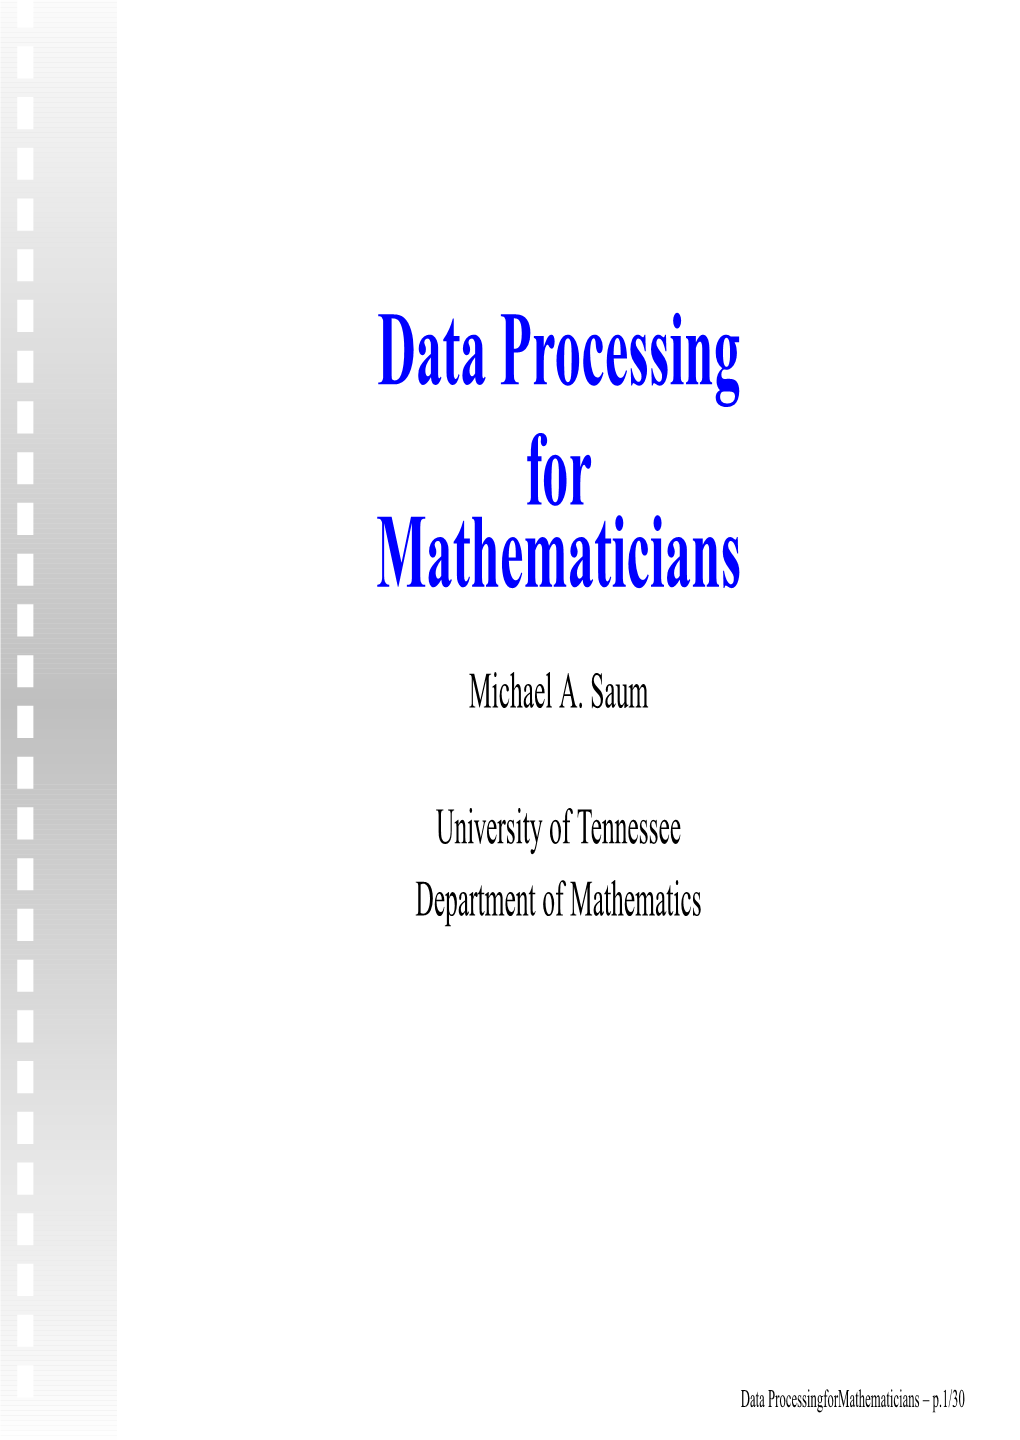 Data Processing for Mathematicians